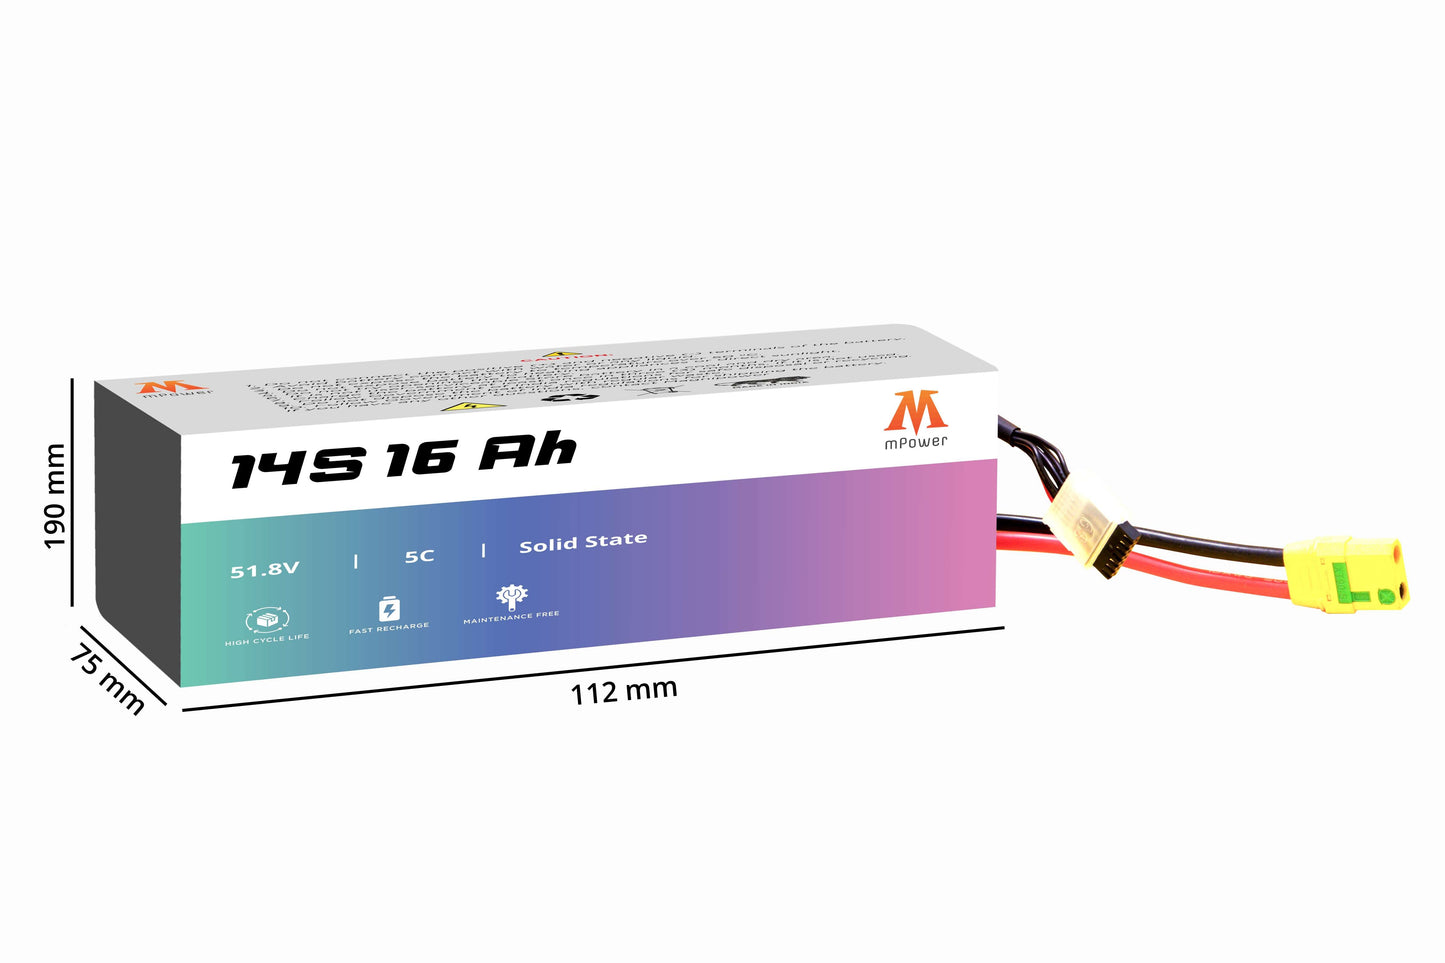 mPower 14S 16Ah Solid States Battery for Delivery Drones